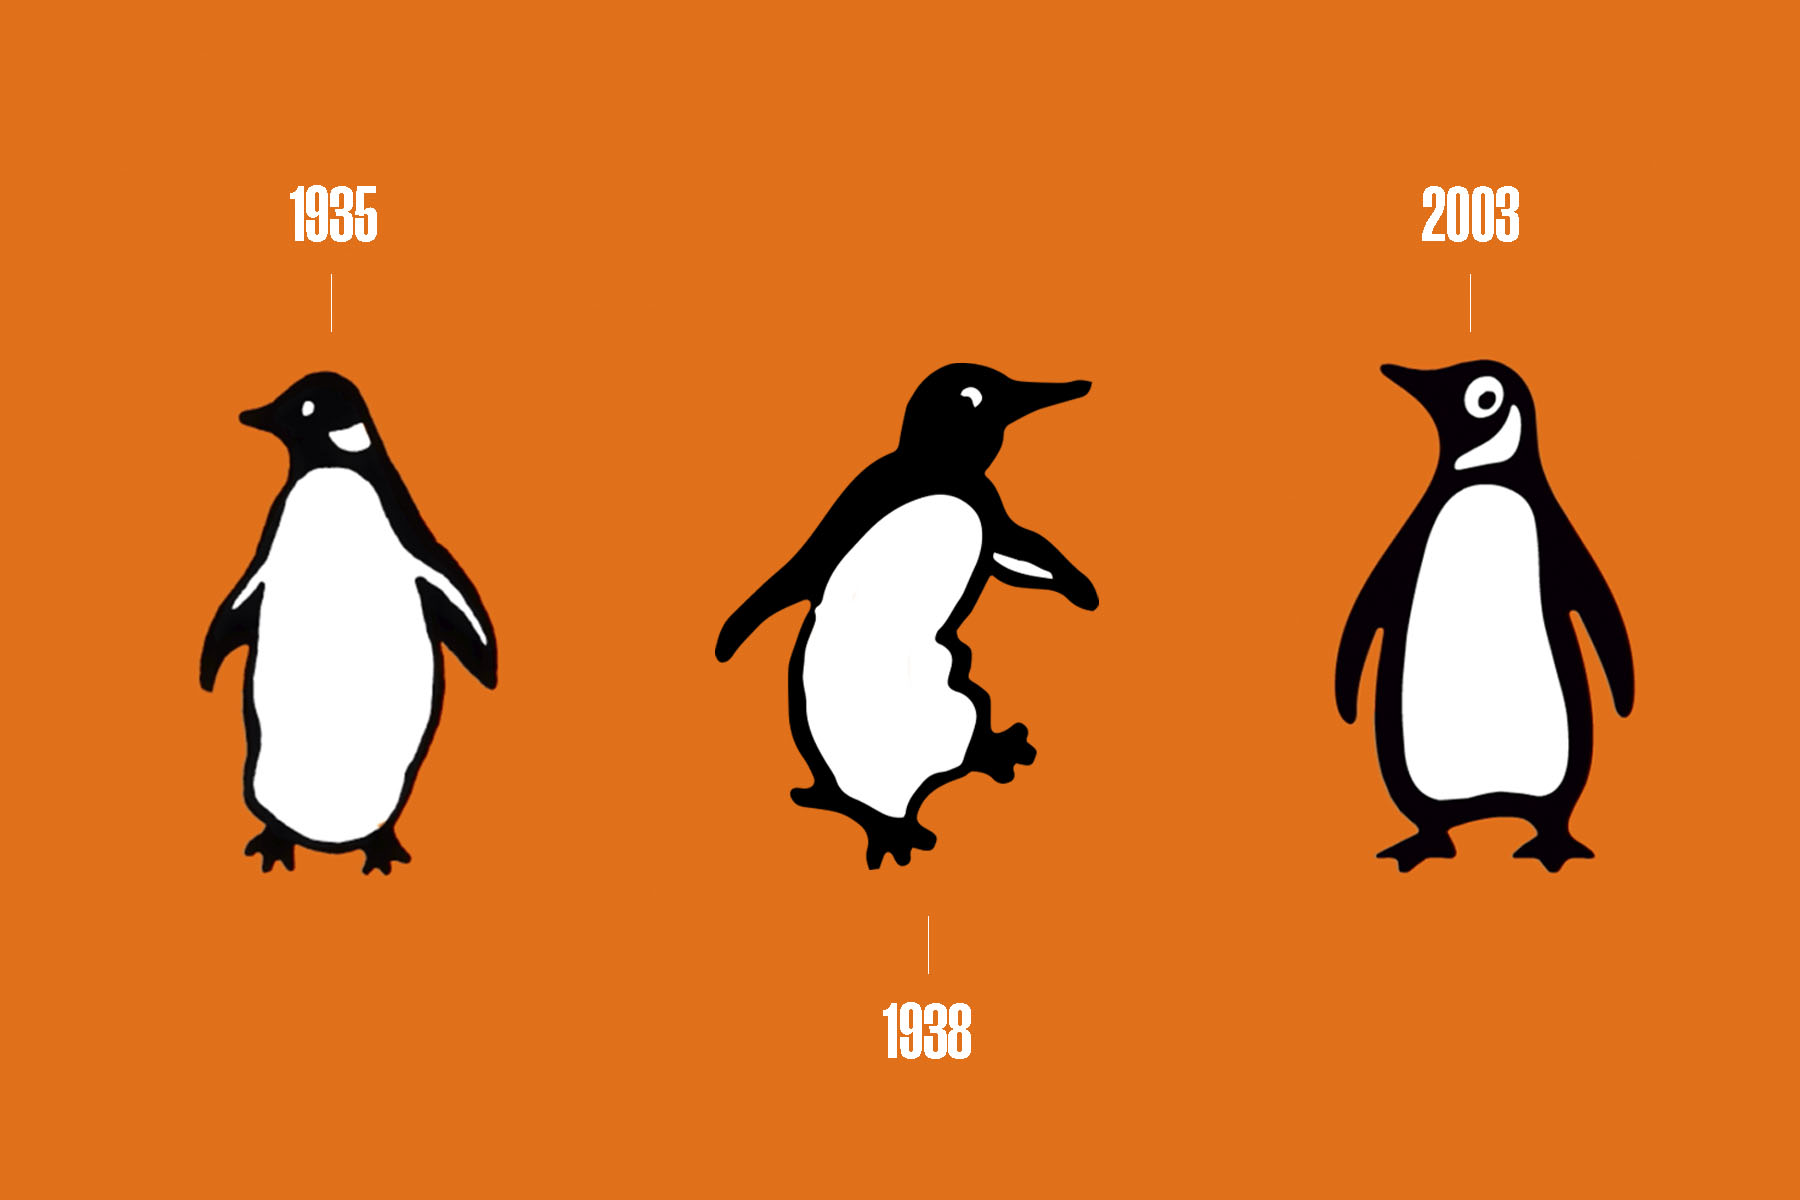 Three of the penguins from the Penguin Books logo, one from 1935, one from 1938 and one from 2003, on an orange background.